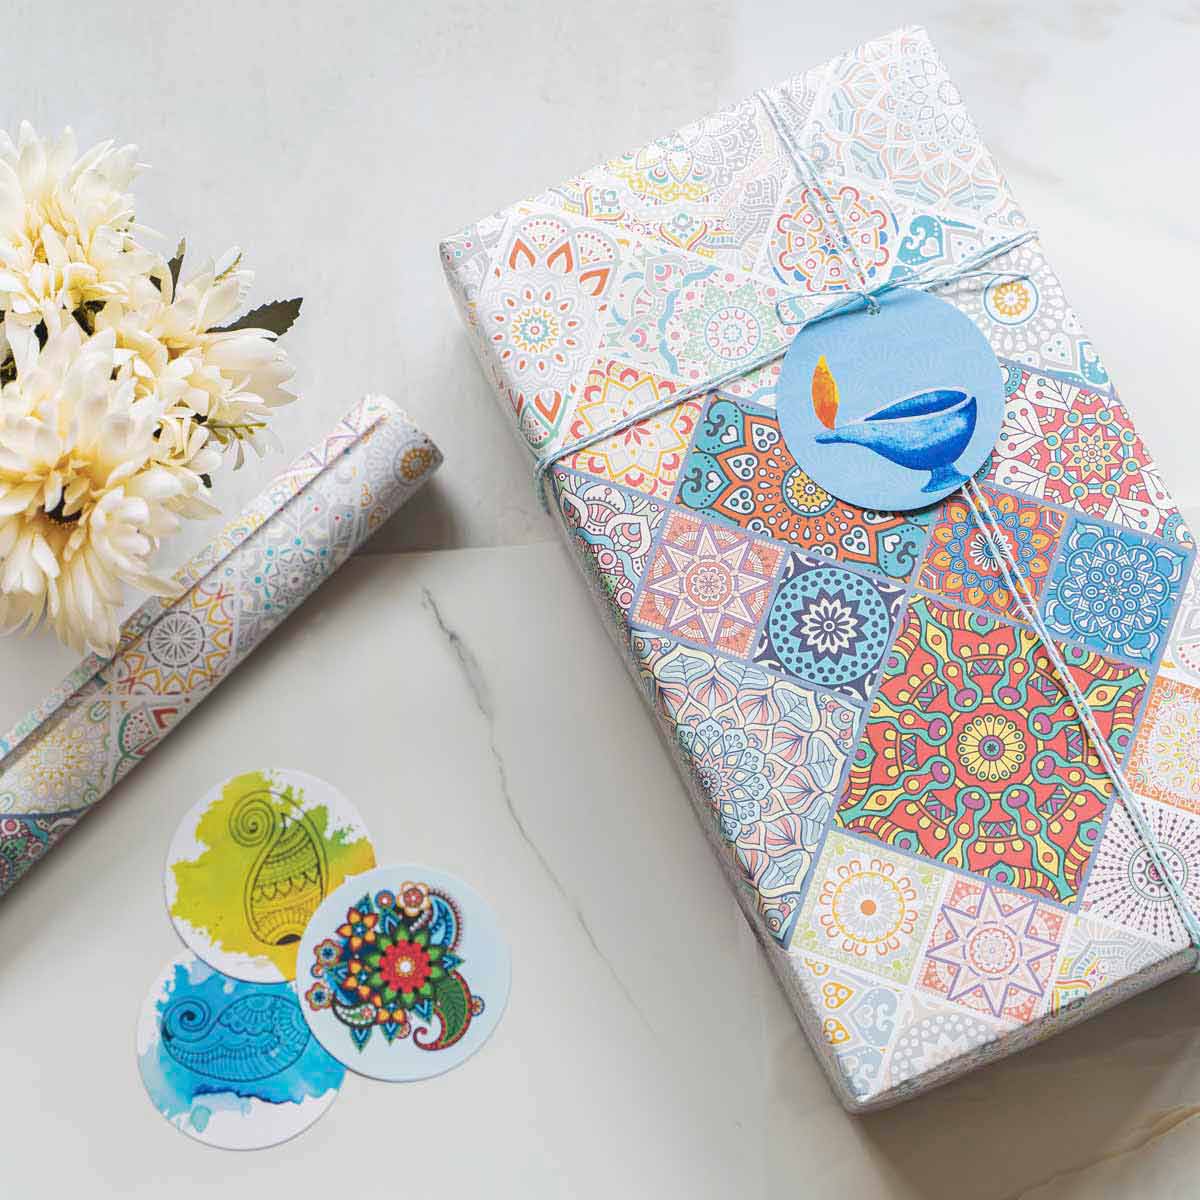 Diwali Ethnic Gift Wrapping Paper: Add Ethnic Feel on Gifts with Basic Pattern Wrappers